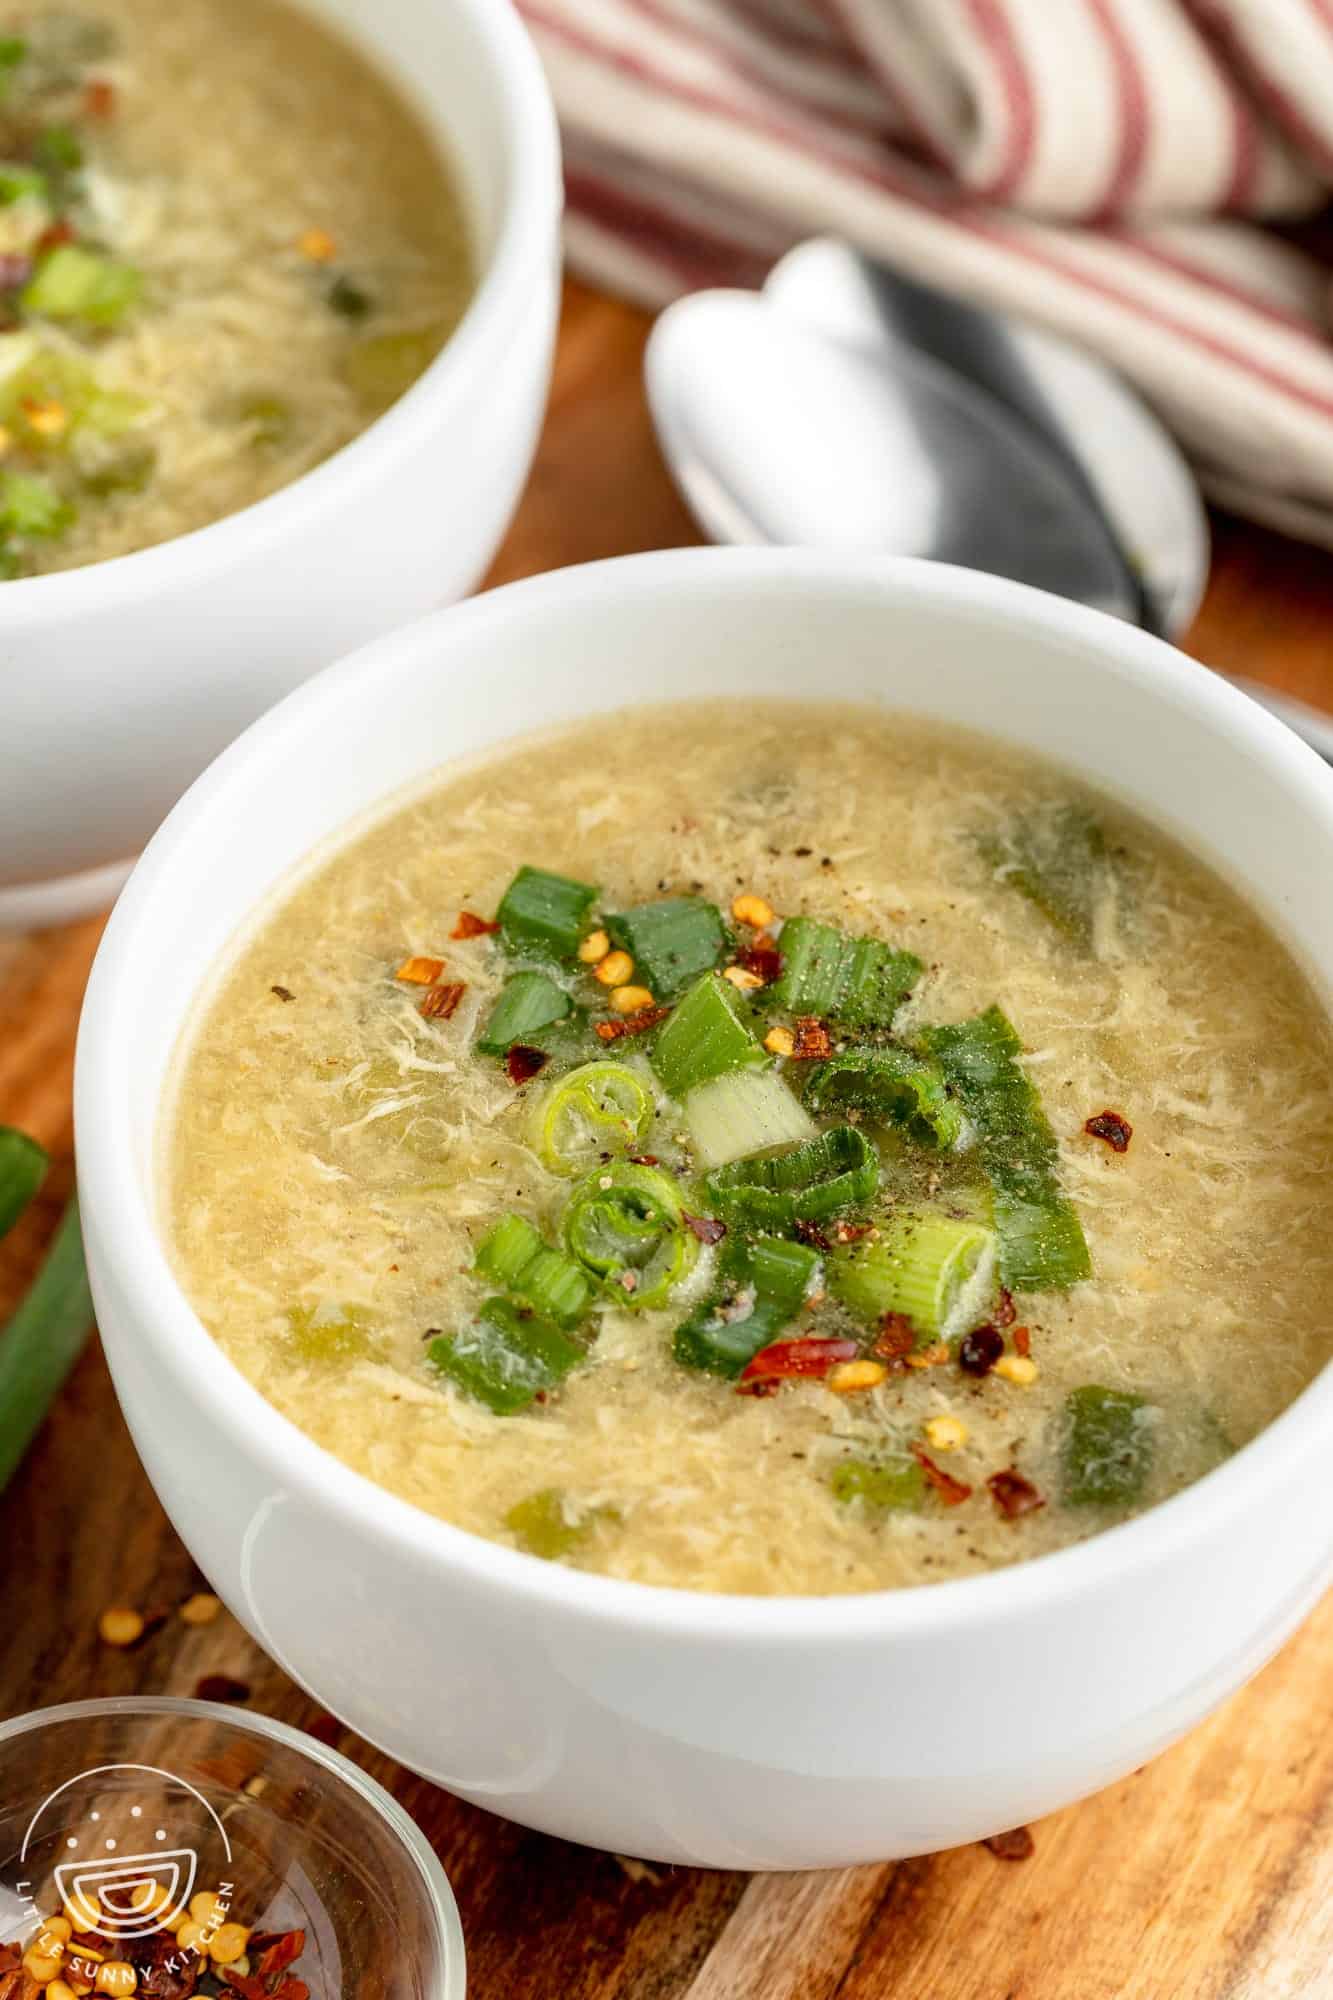 a bowl of homemade egg drop soup garnished with green onion, sitting on a wooden cutting board next to another bowl of soup and a small bowl of crushed red pepper flakes.